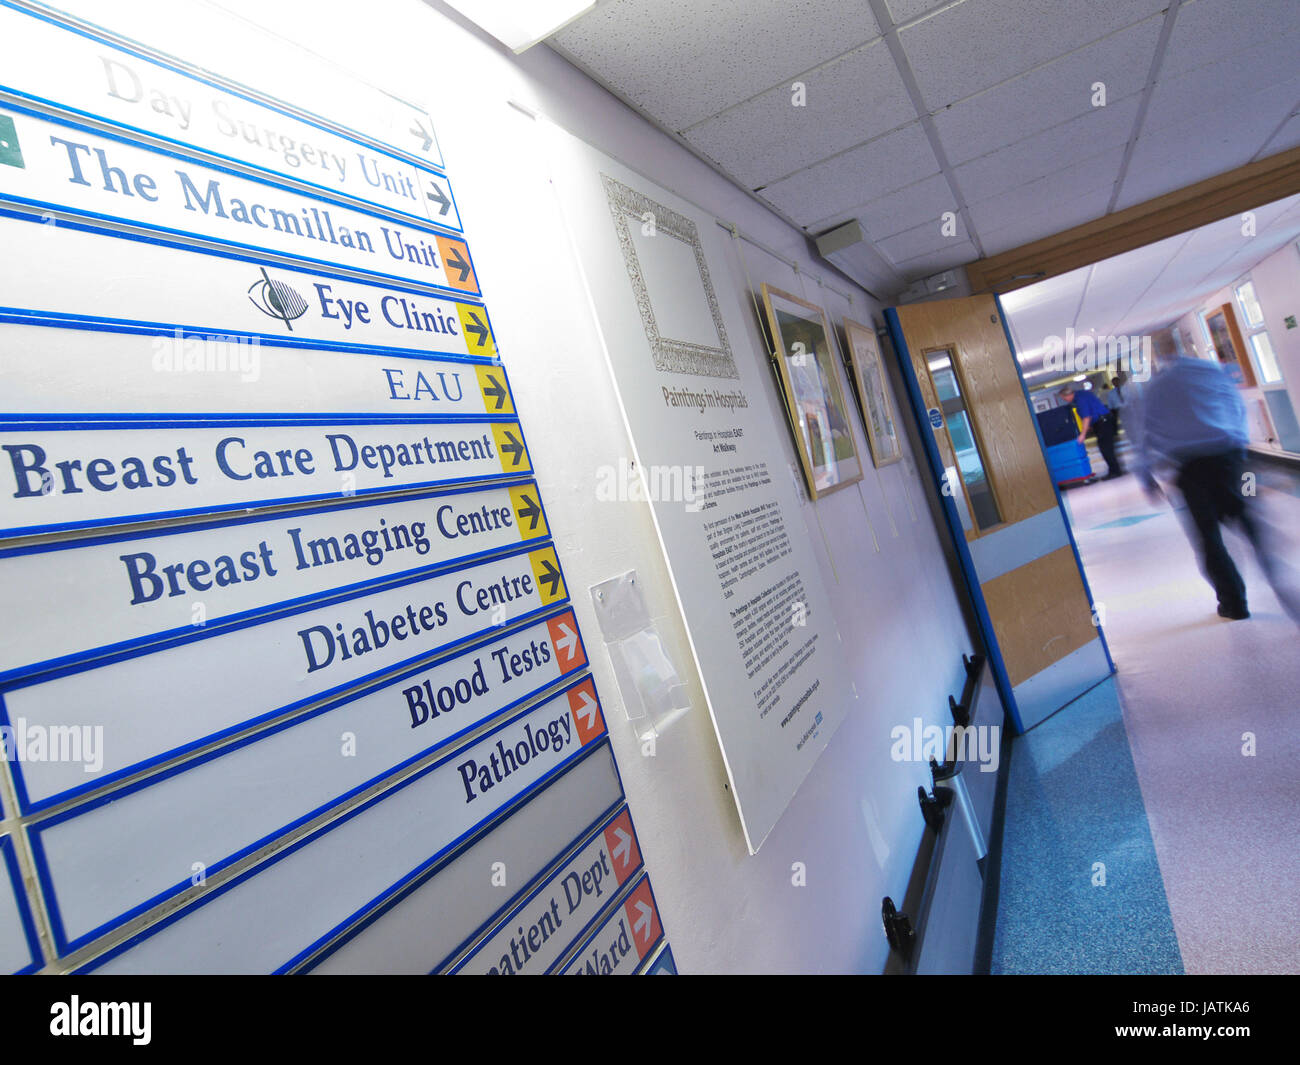 NHS Hospital signage in UK hospital with patient blur through doorways and corridors Stock Photo